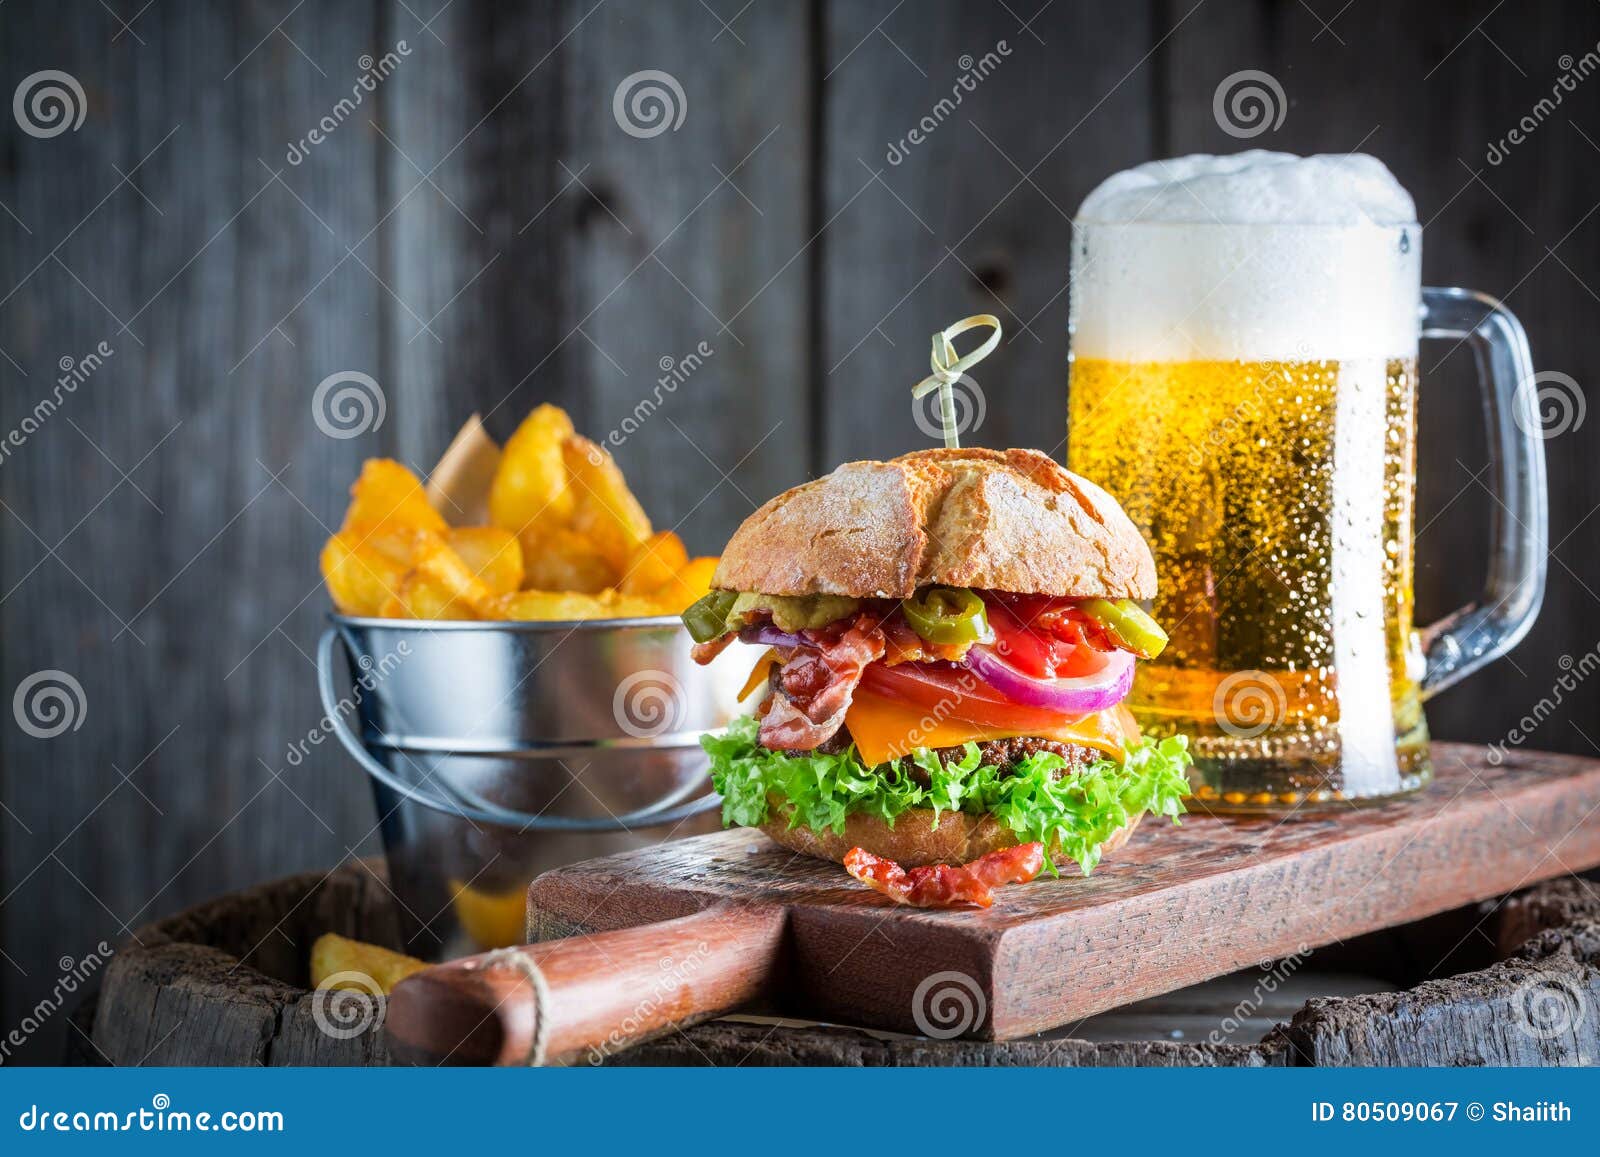 Beer and fresh hamburger made of beef, cheese and vegetables on wooden background